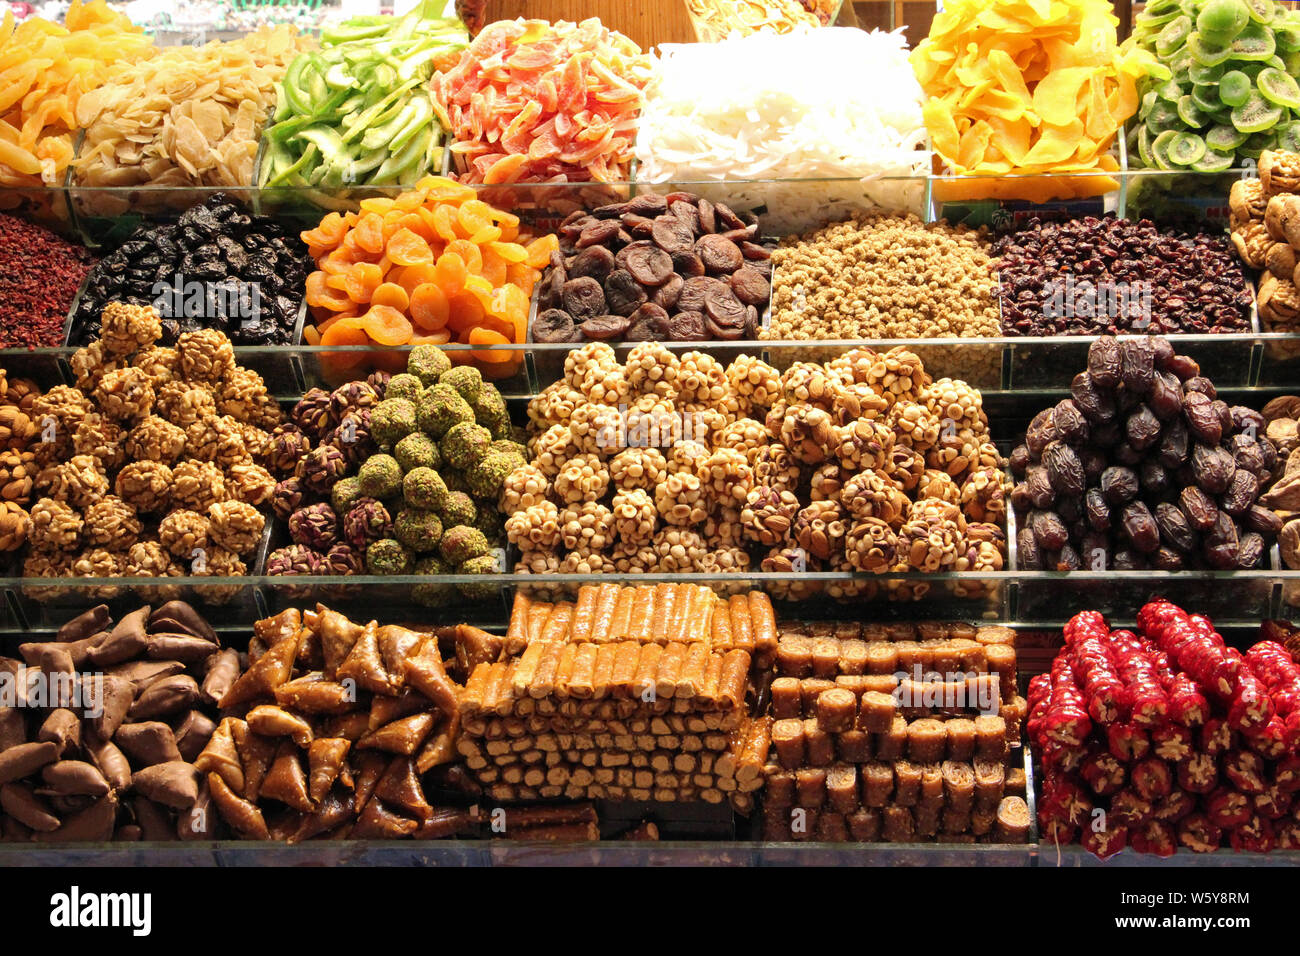 Fruit and Treats at the Spice Bazaar in Istanbul, Turkey Stock Photo